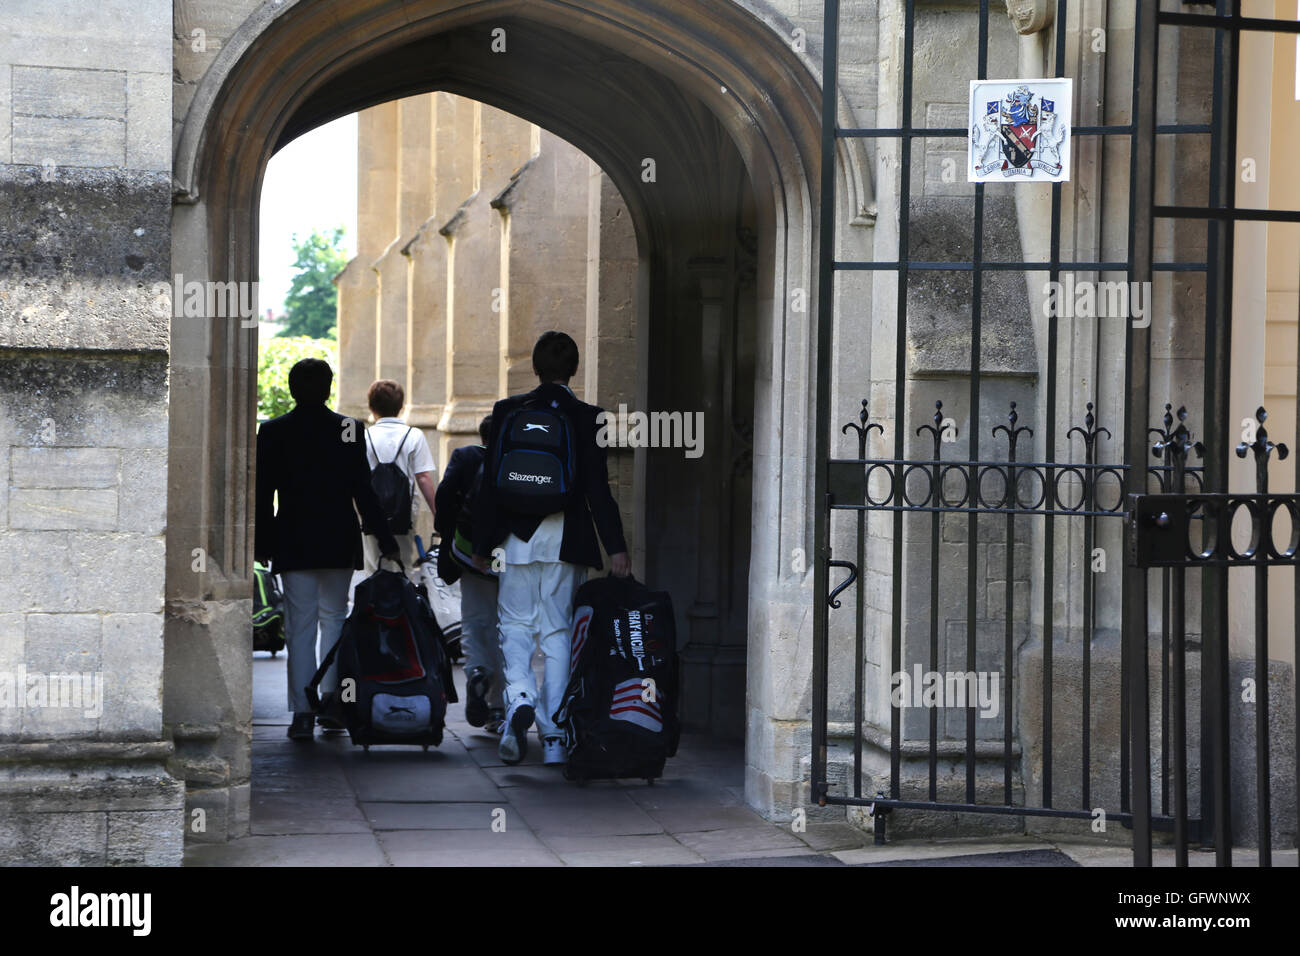 Cheltenham Gloucestershire England Cheltenham College Students With Bags Walking Through Archway Stock Photo